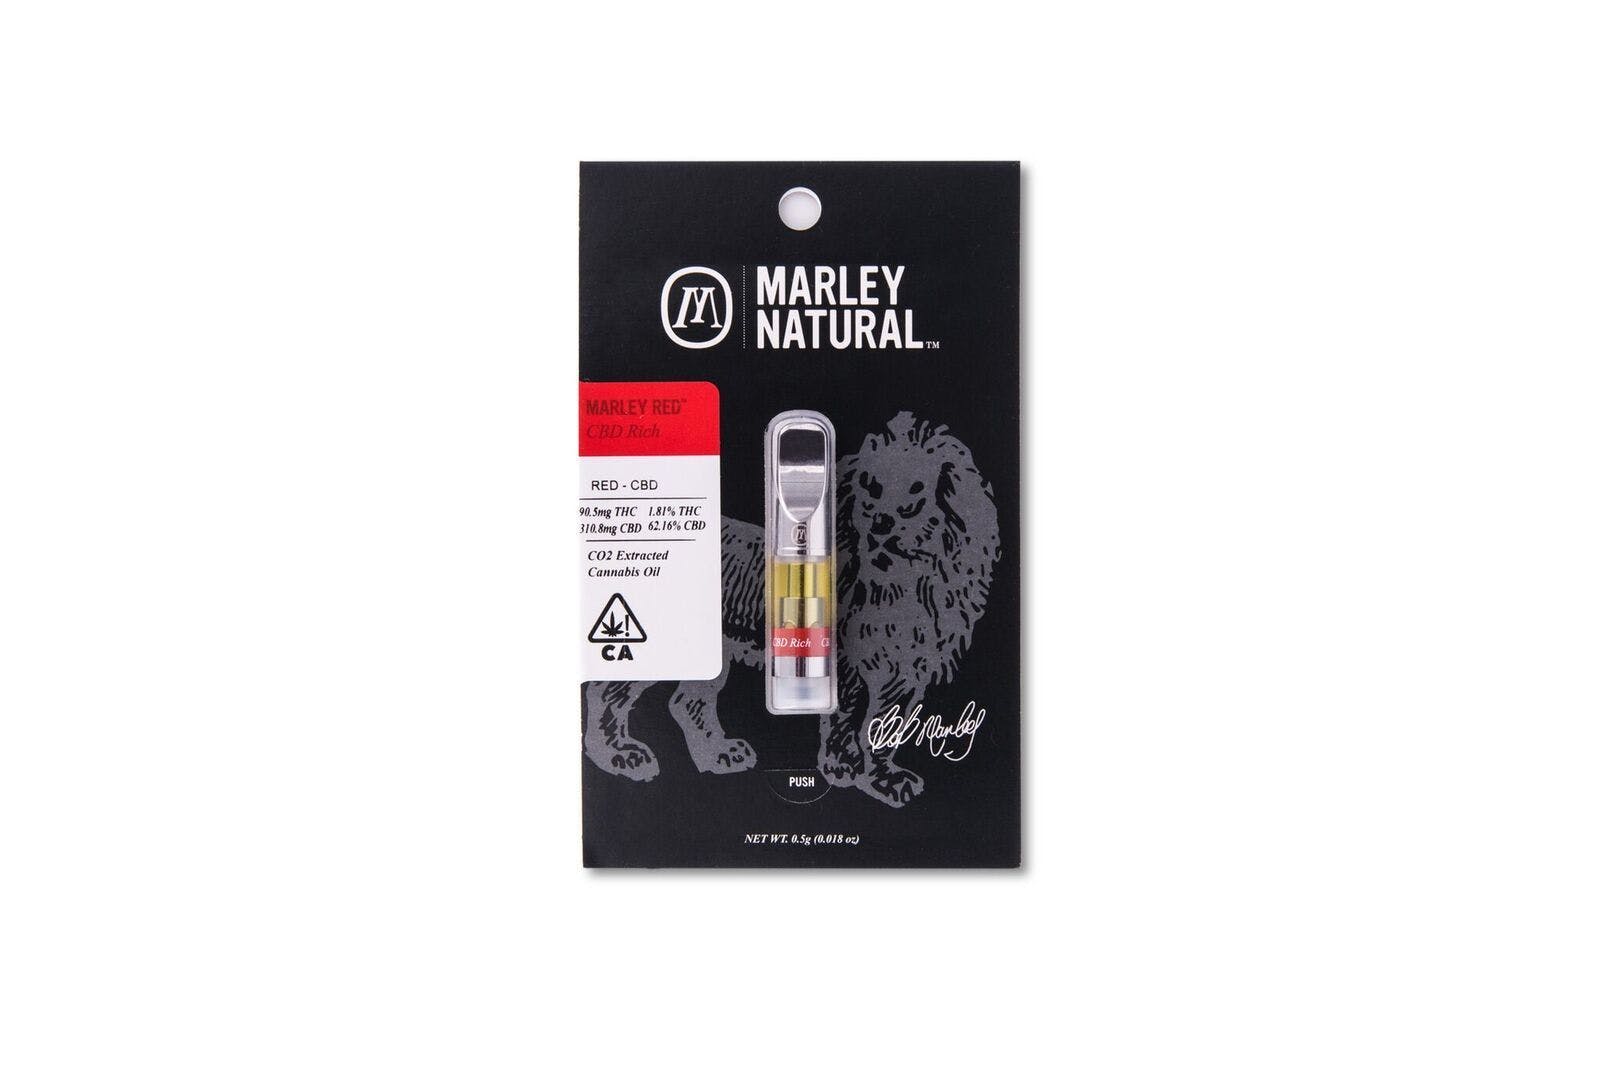 concentrate-marley-natual-red-cbd-5g-cart